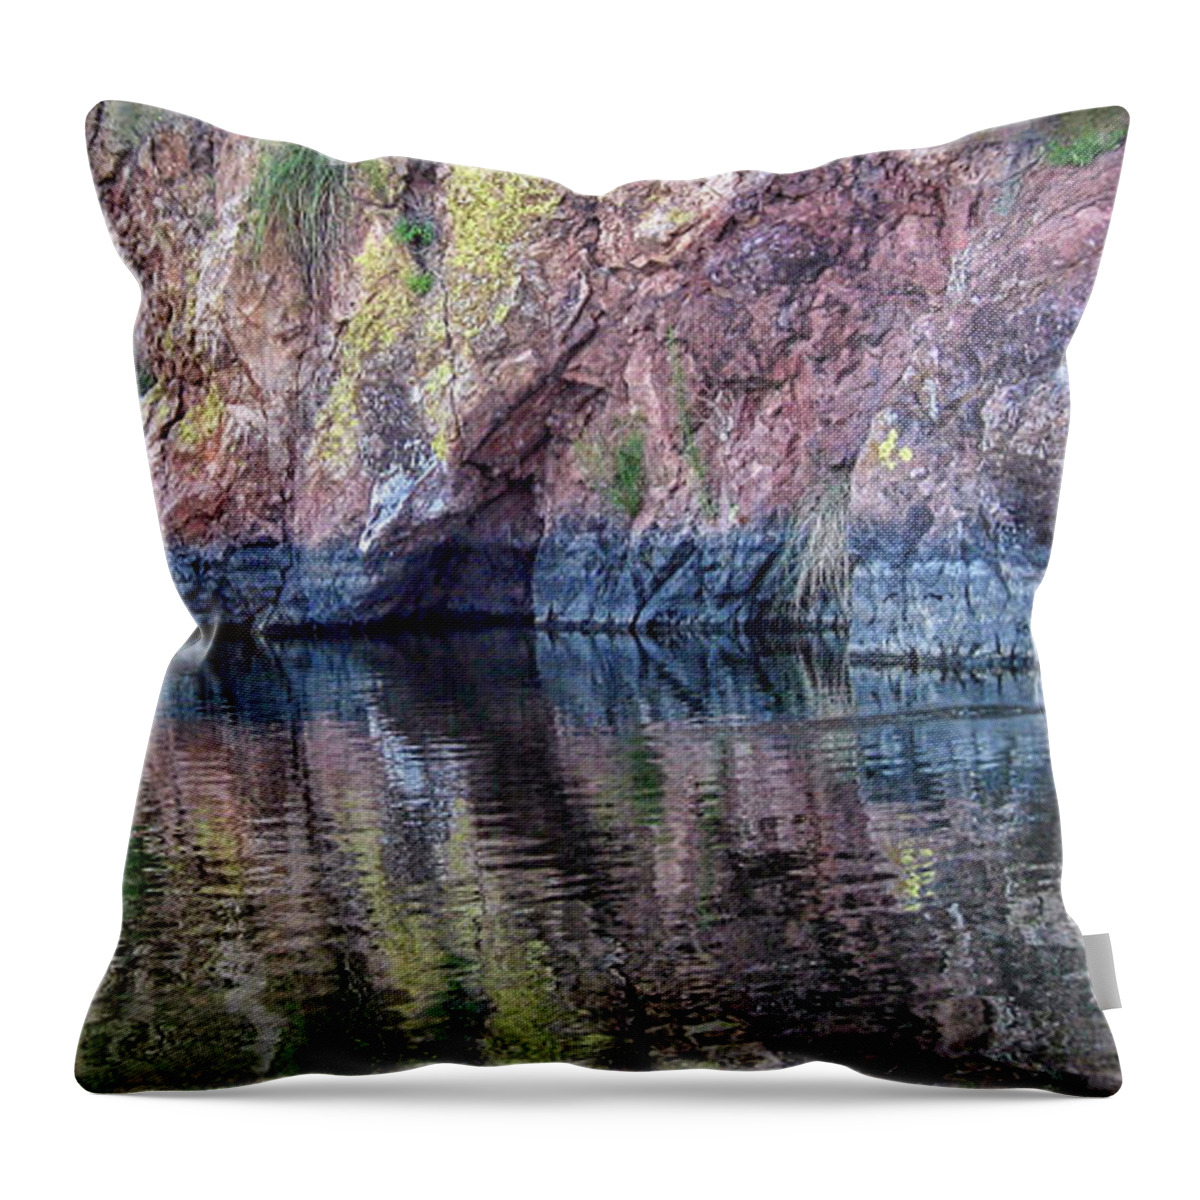 Lakes Throw Pillow featuring the photograph All About The Colors by Elaine Malott